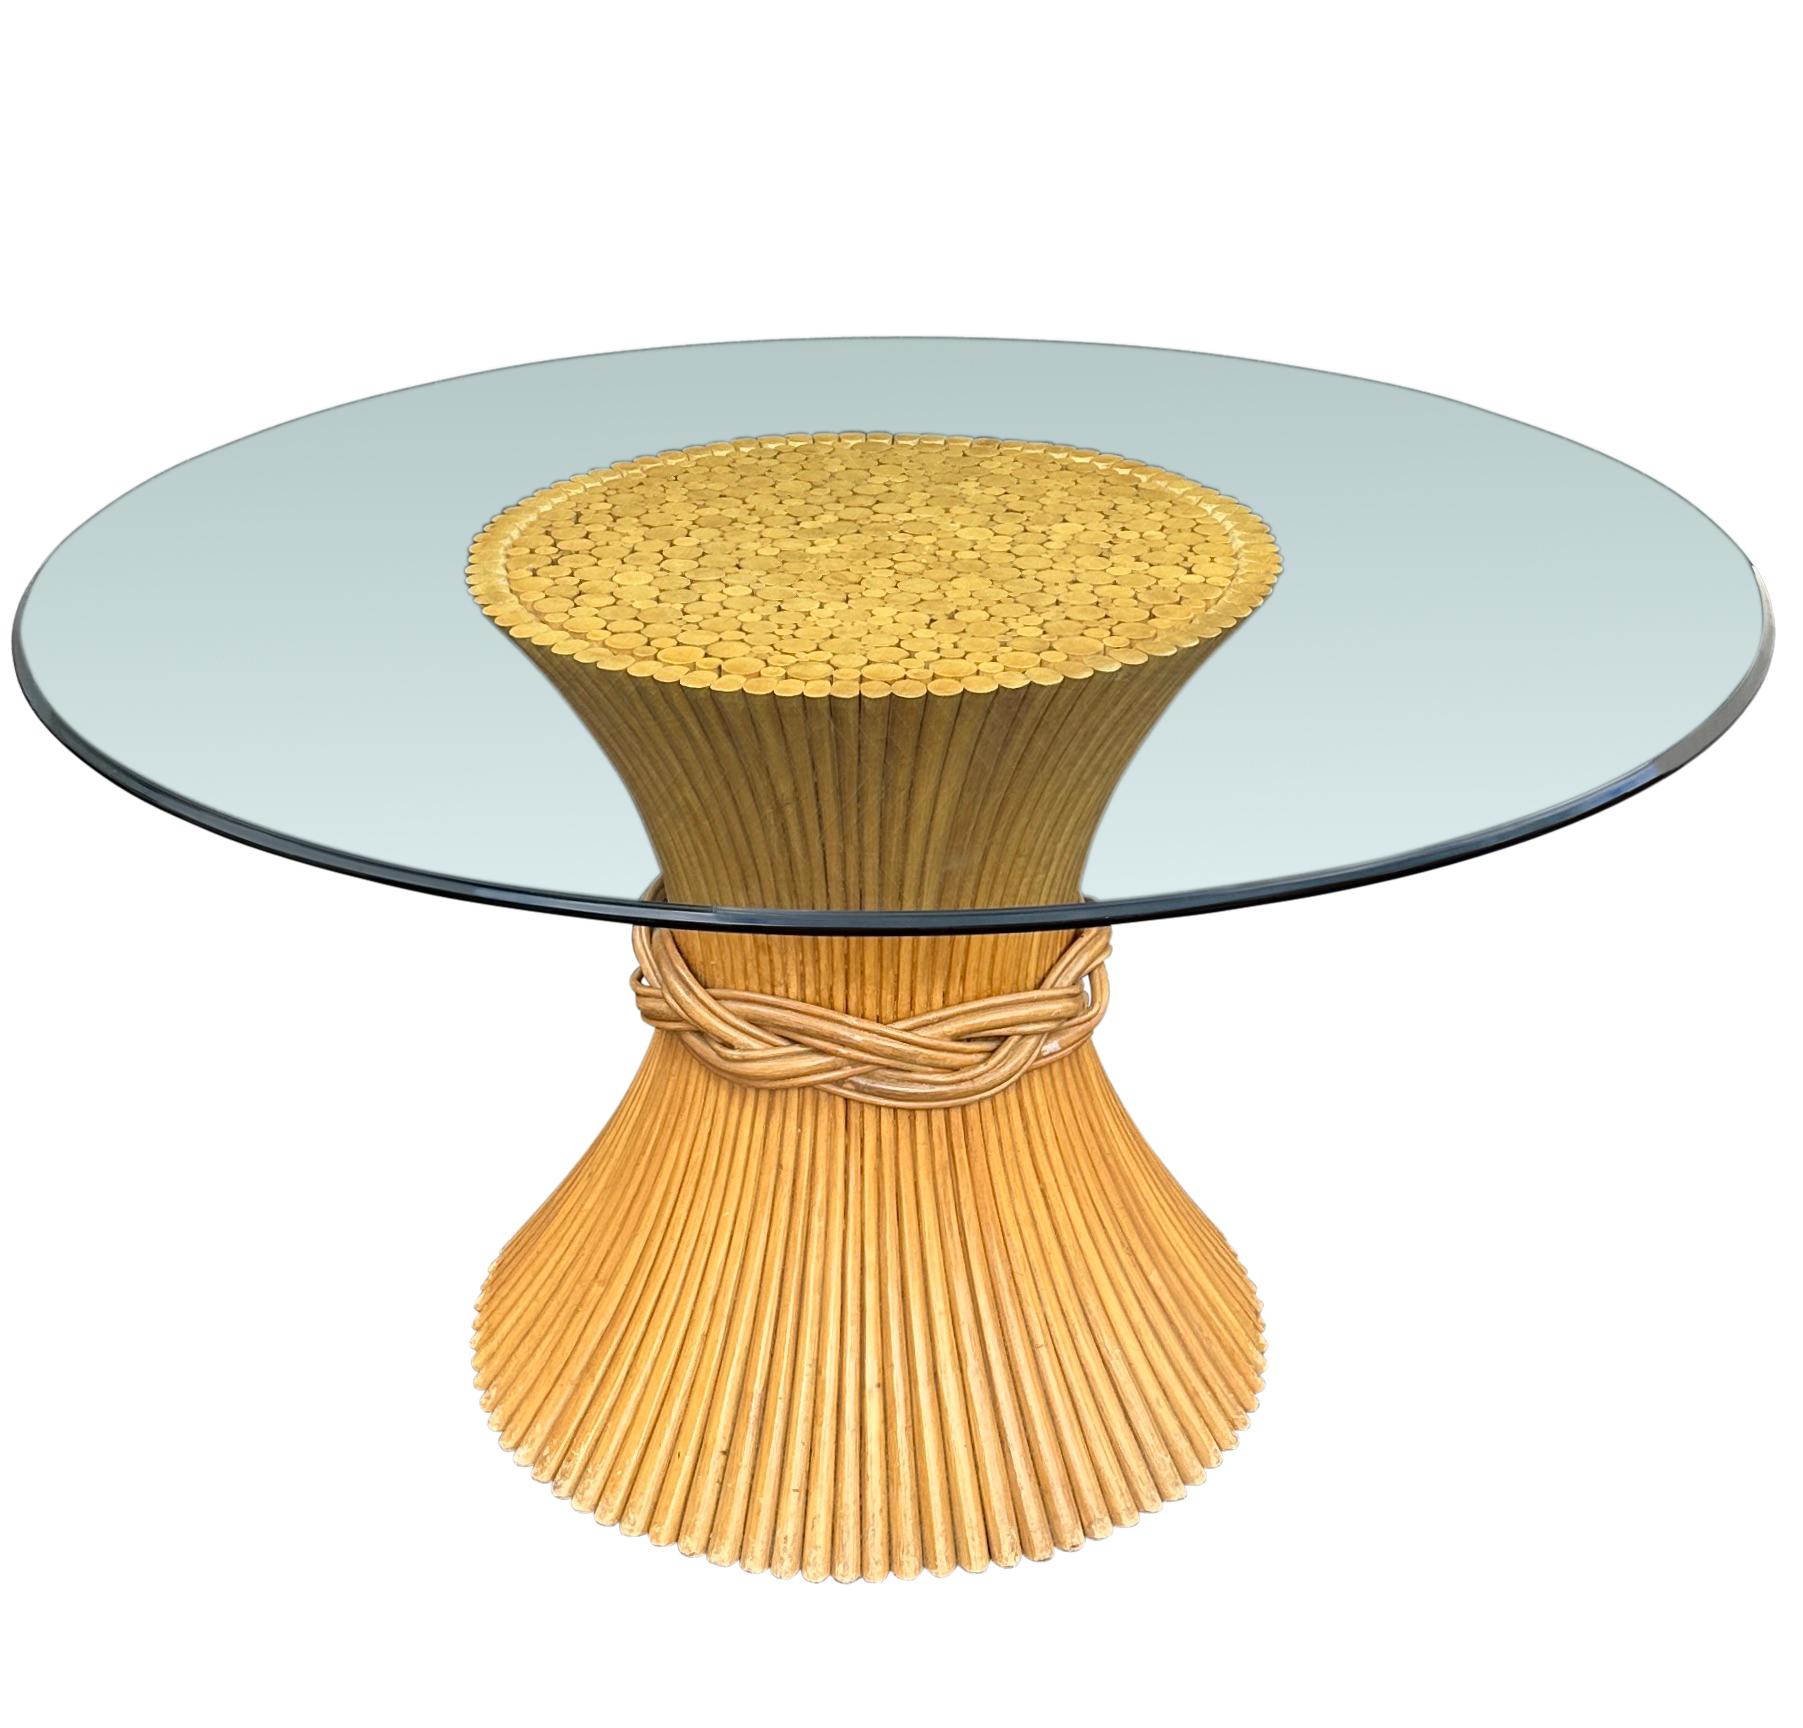 Hollywood Regency Sheaf of Wheat Bamboo Pedestal Dining Table by McGuire